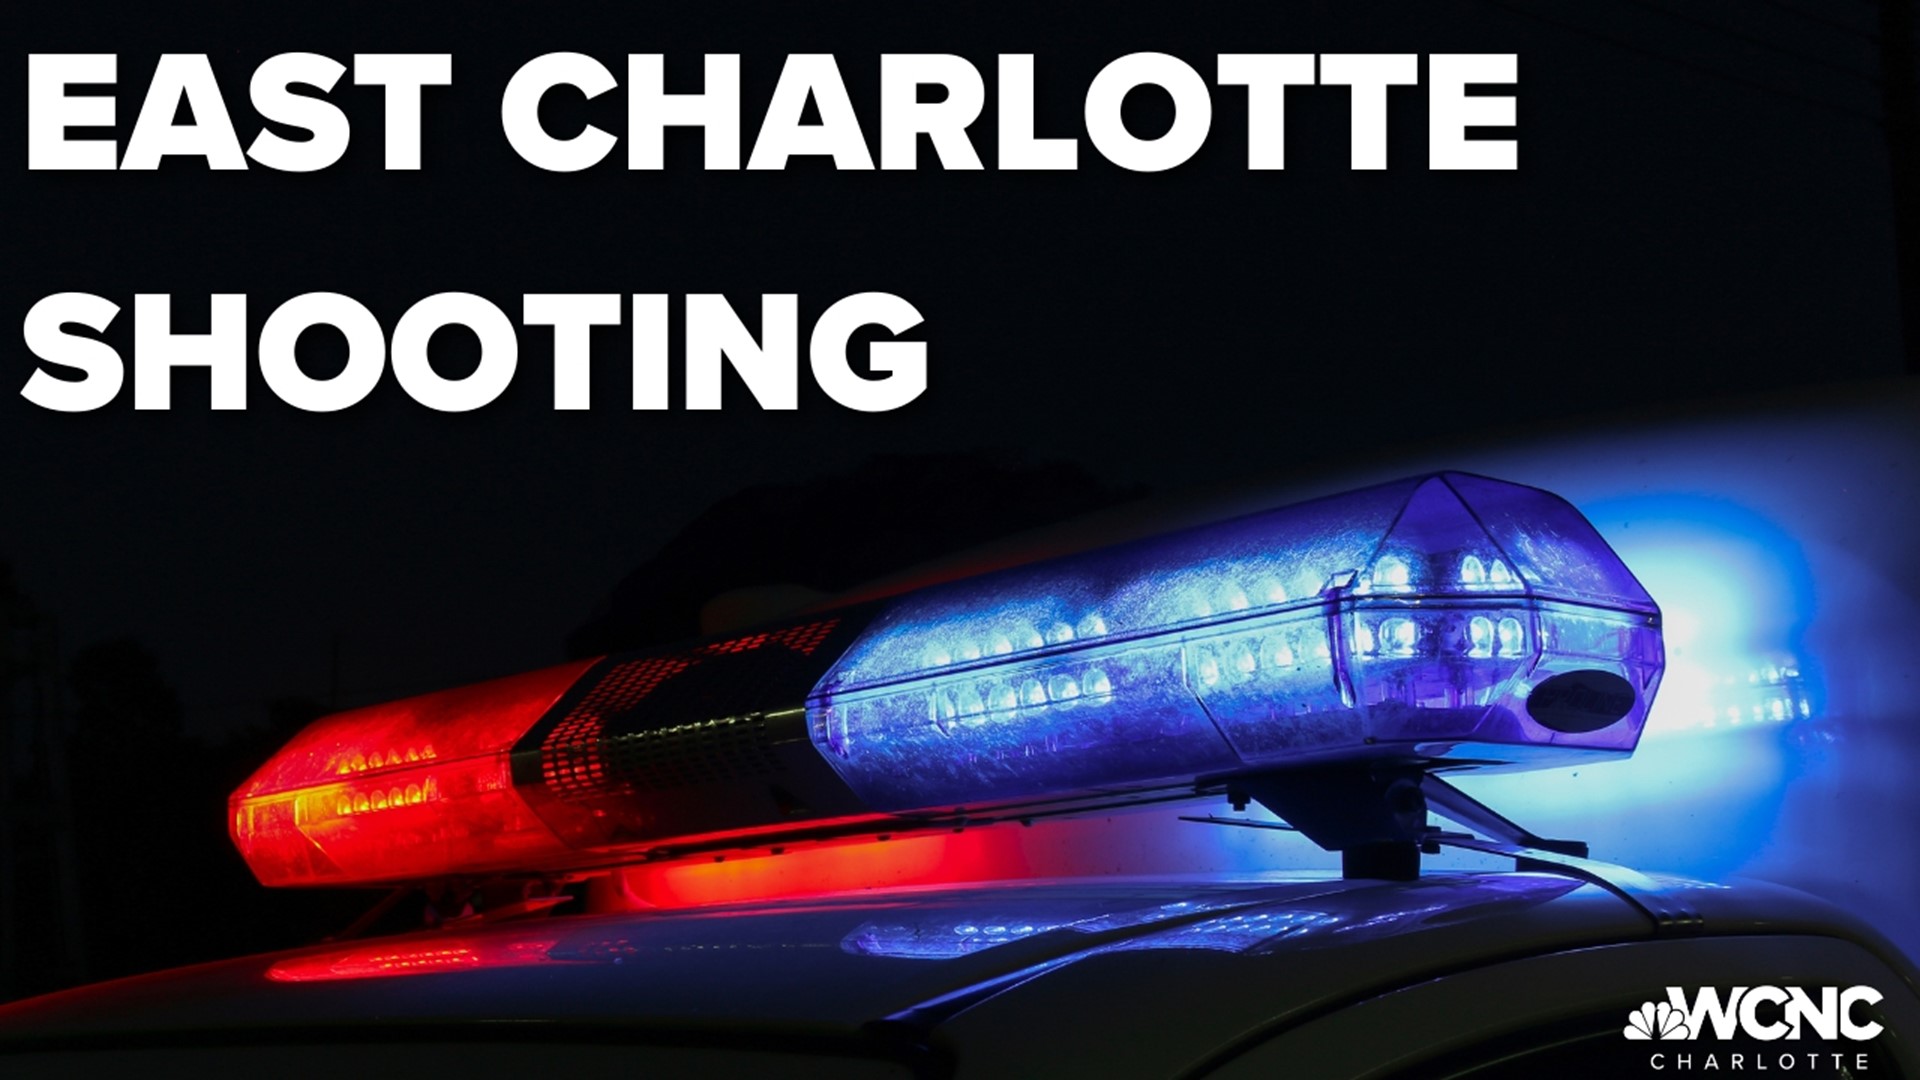 A man was pronounced dead after a shooting in east Charlotte on Sunday.